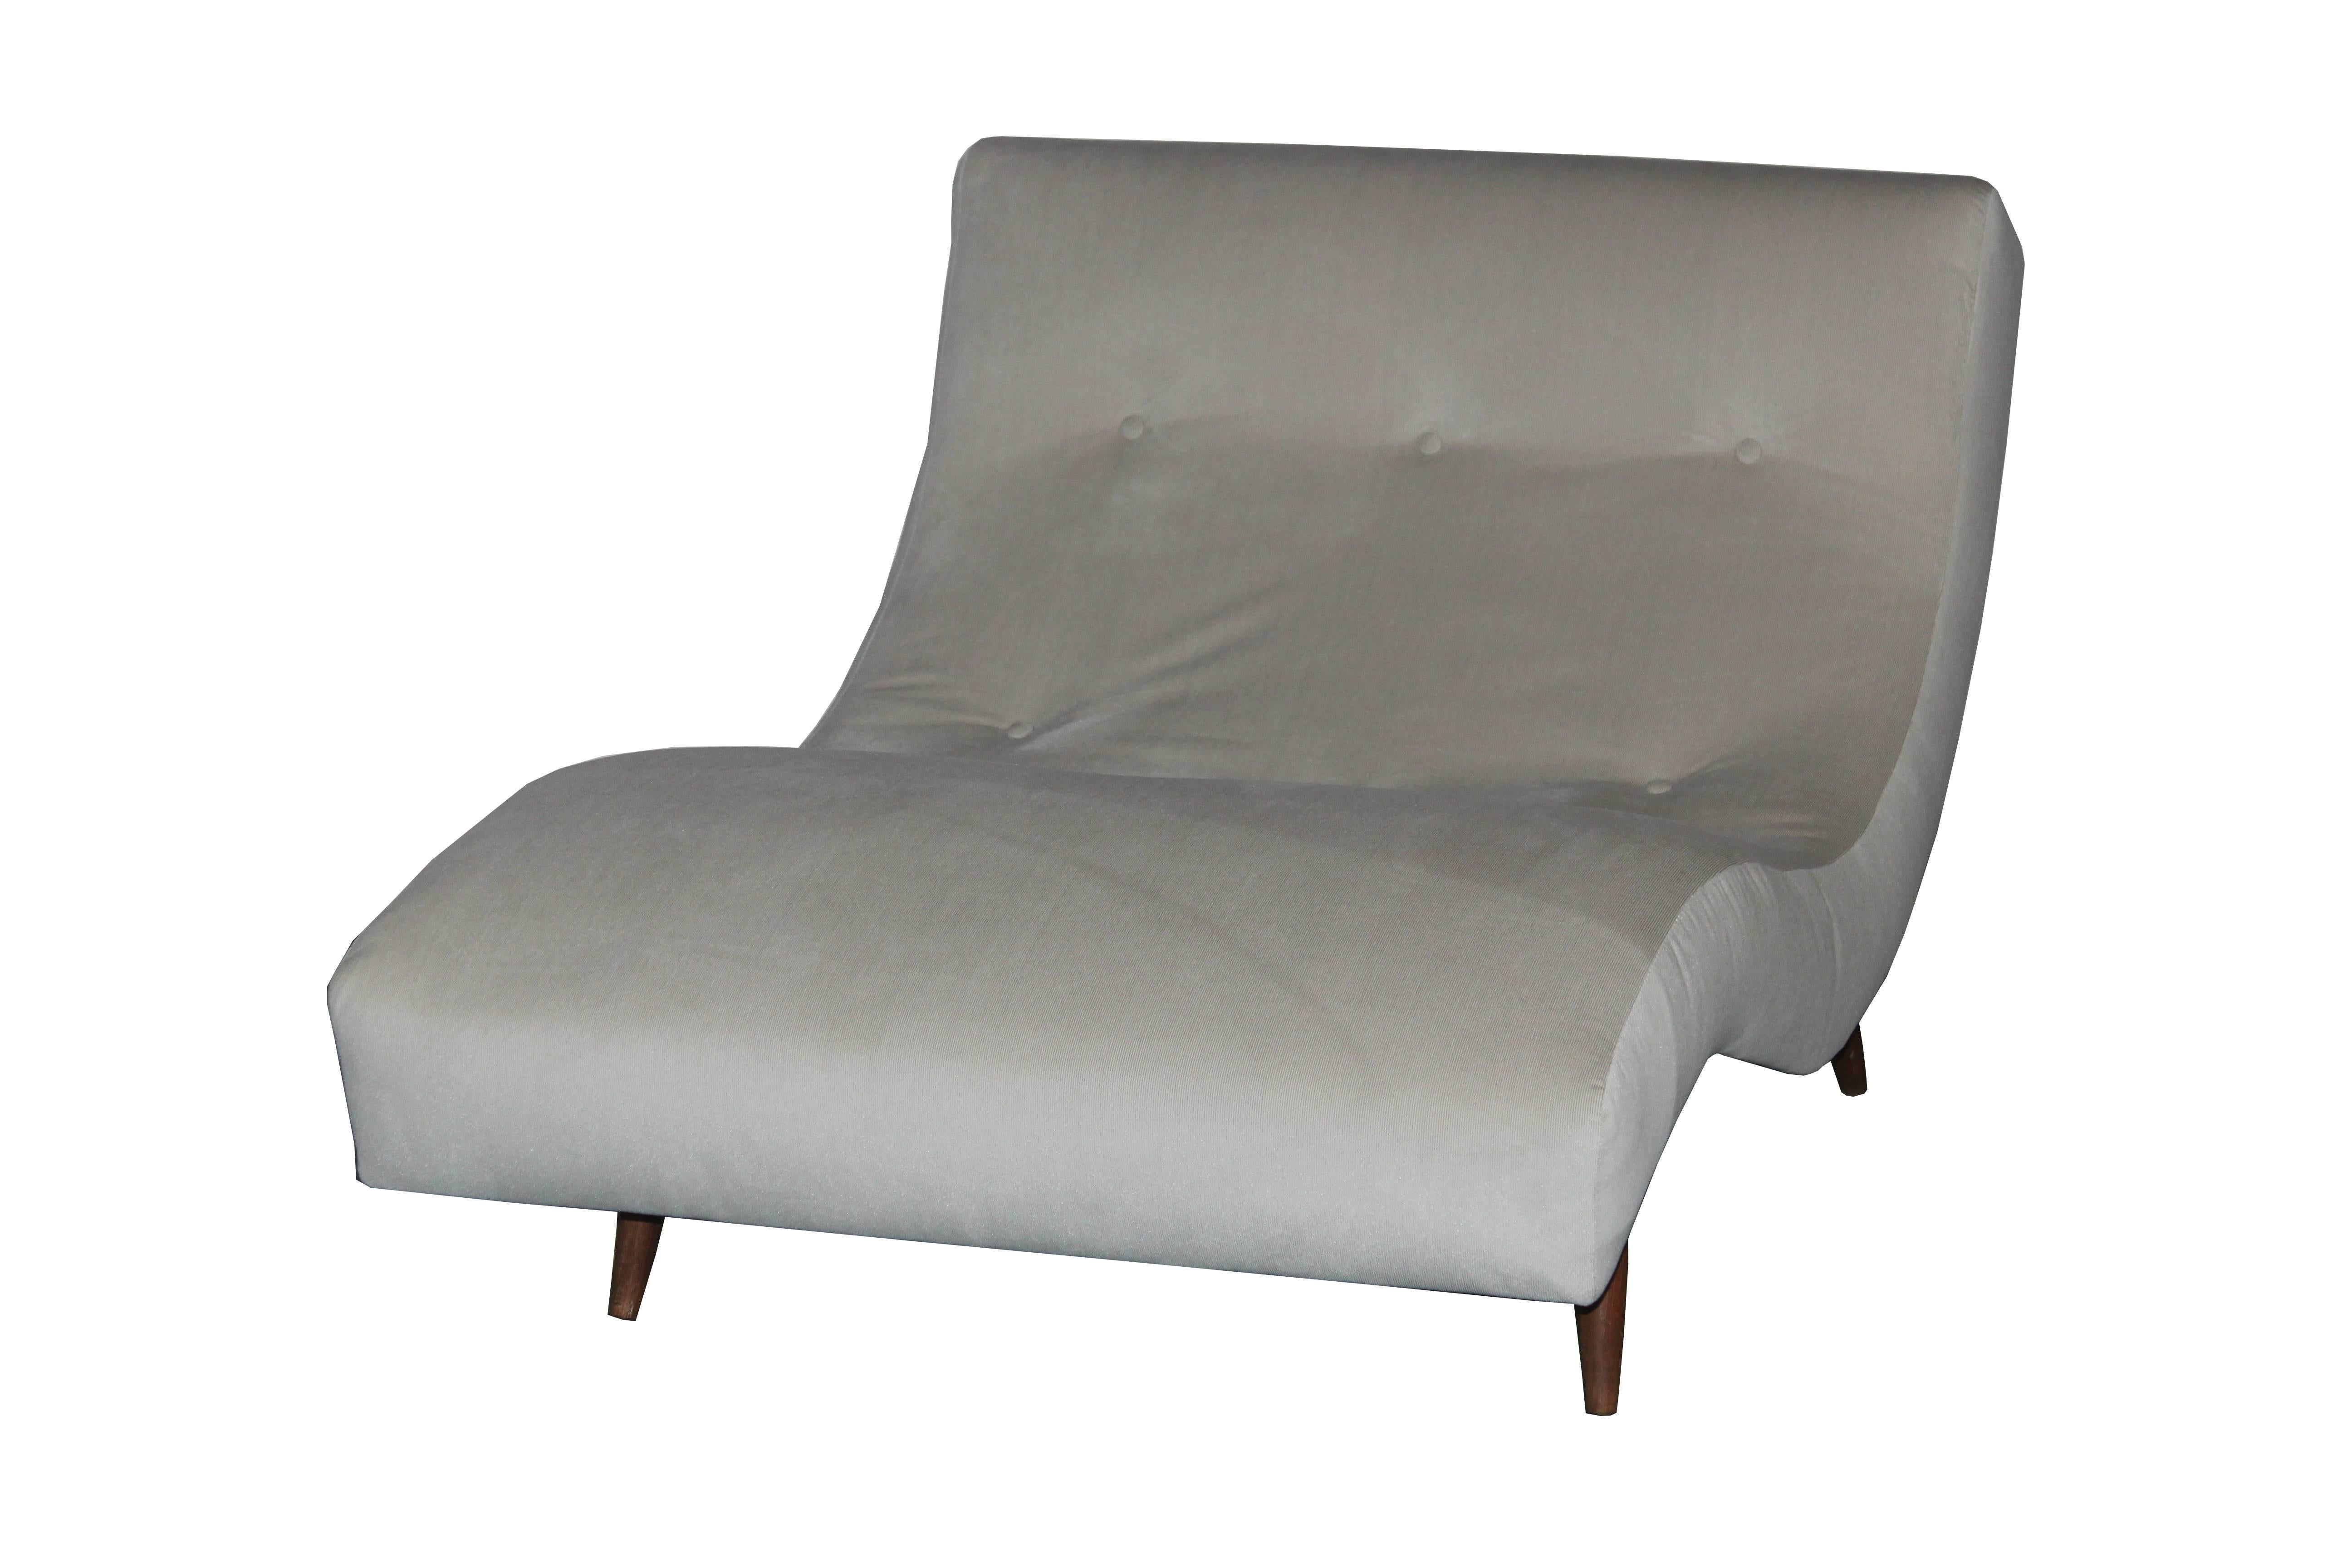 Wave shape chaise lounge. Newly upholstered in velvet and chenille mix. Teak legs.